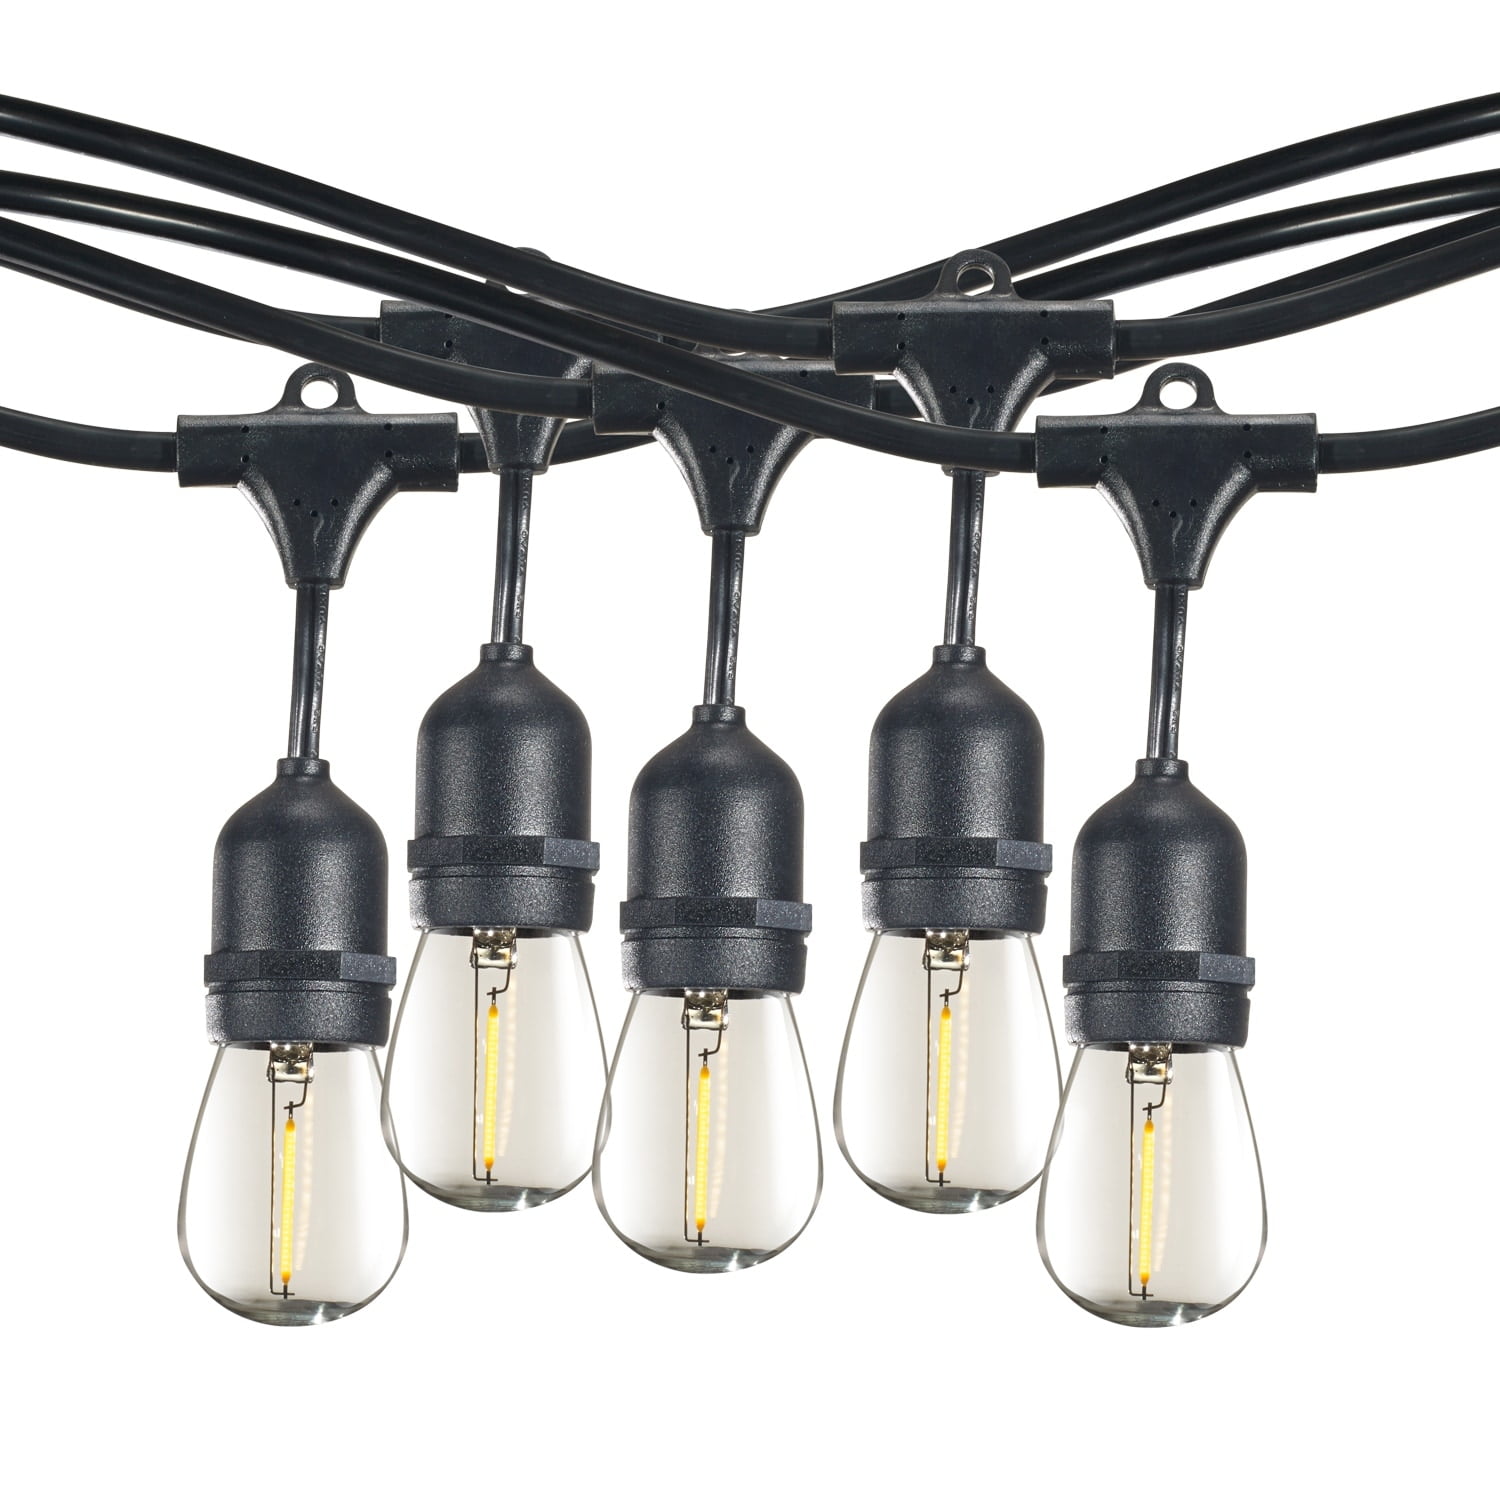 Picture of Bulbrite 812483 48 ft. String Light Kit with Clear Shatter Resistant Vintage Style S14 LED Light Bulbs